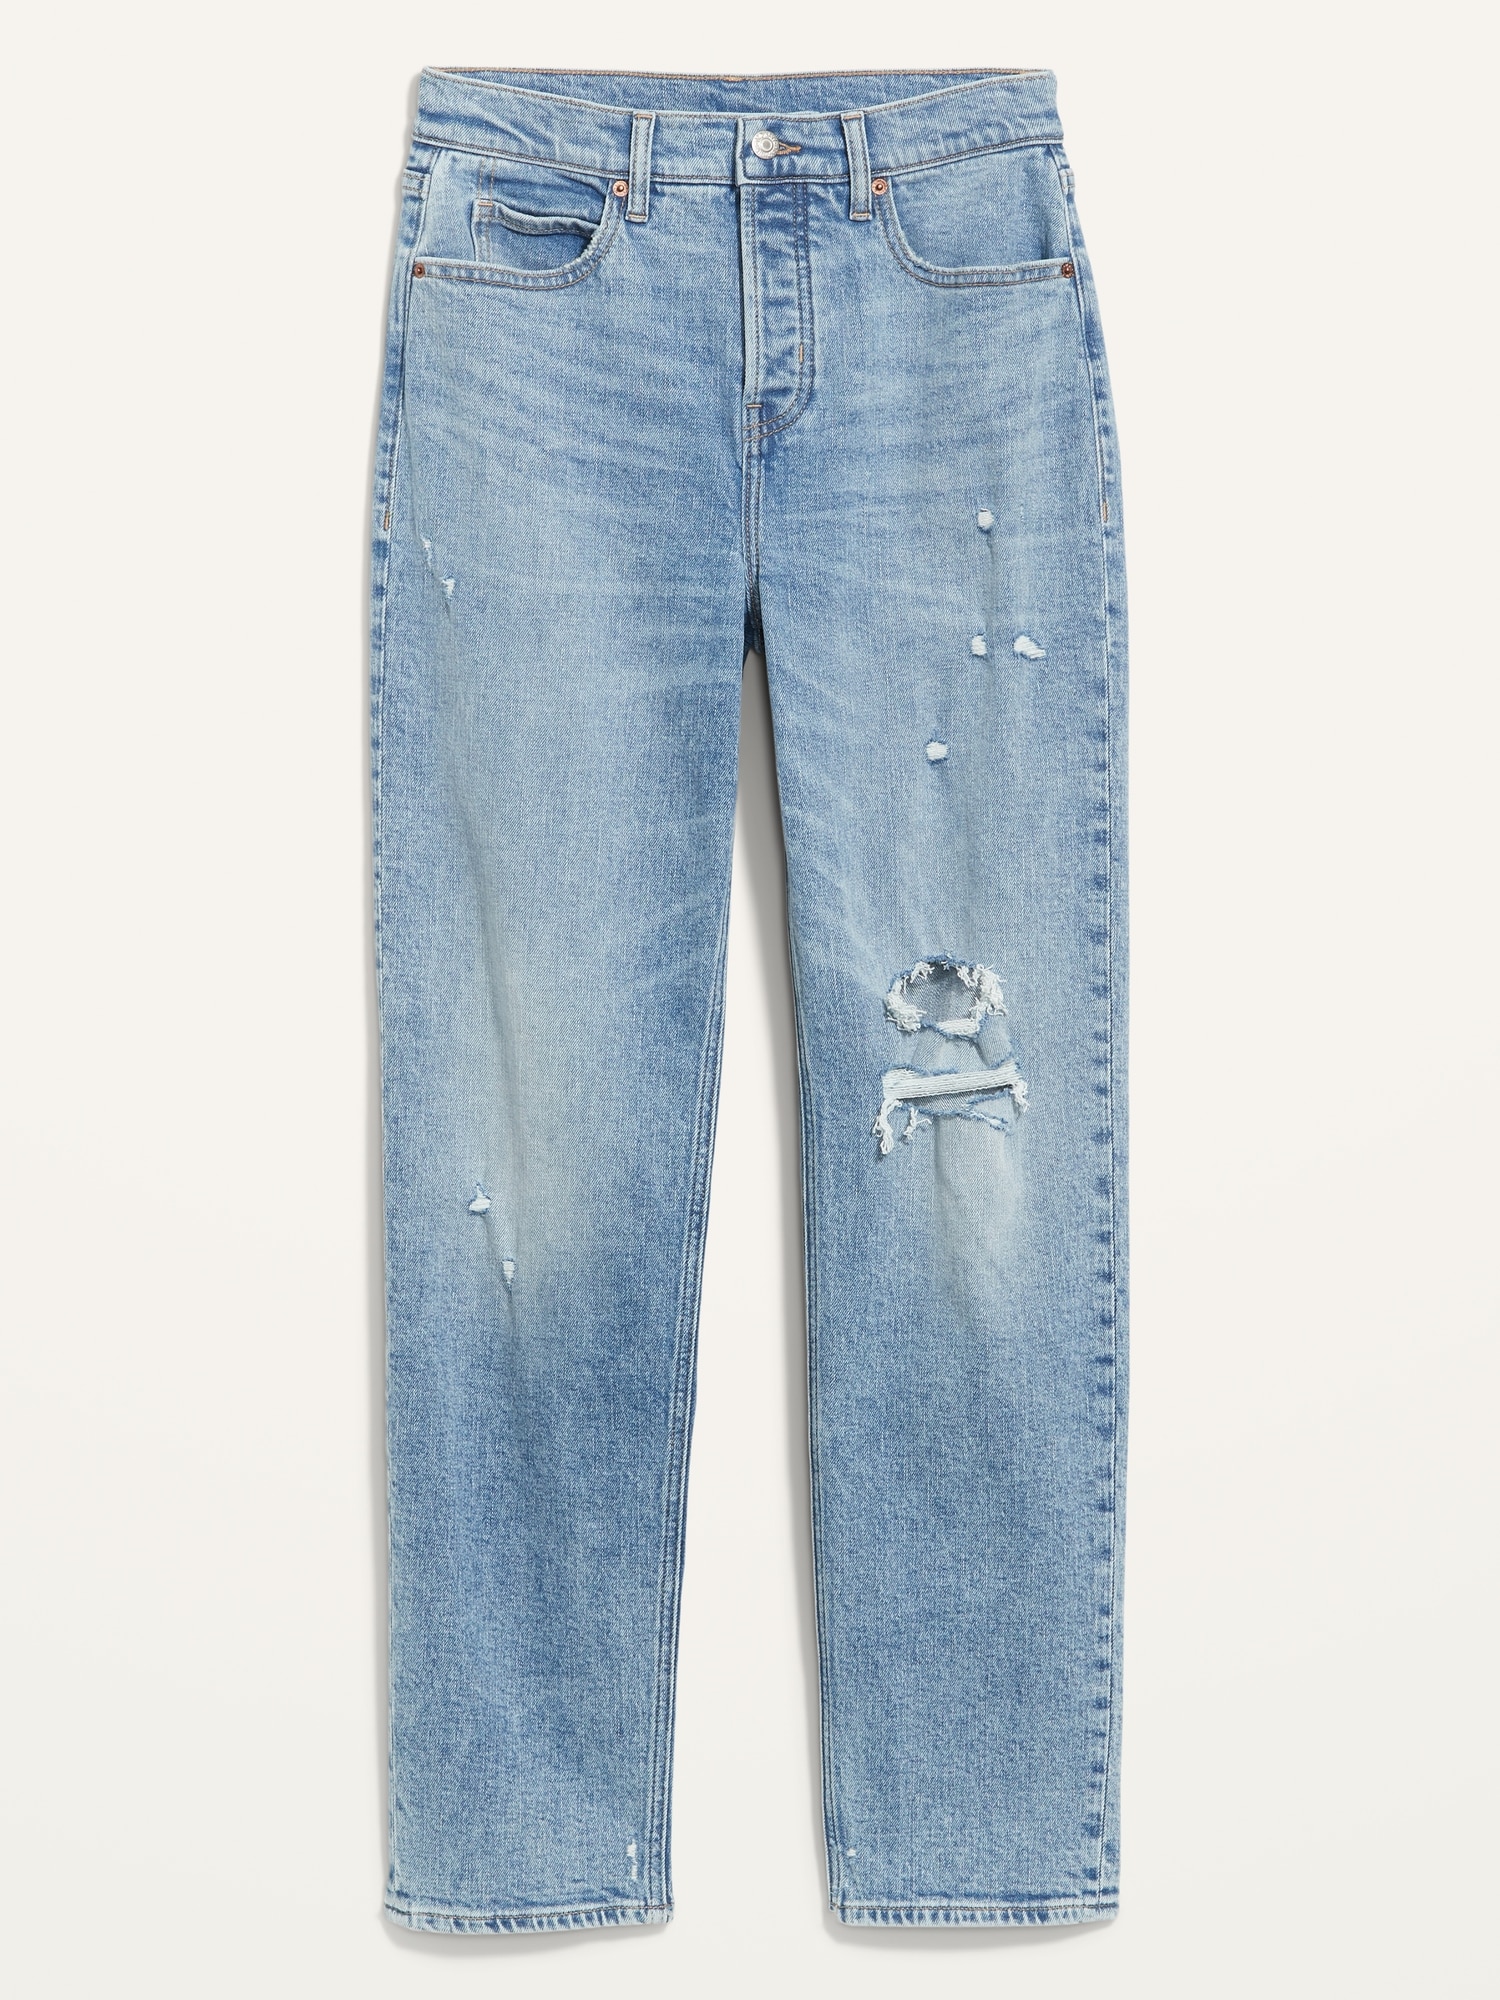 Extra High-Waisted Button-Fly Sky-Hi Straight Ripped Jeans for Women